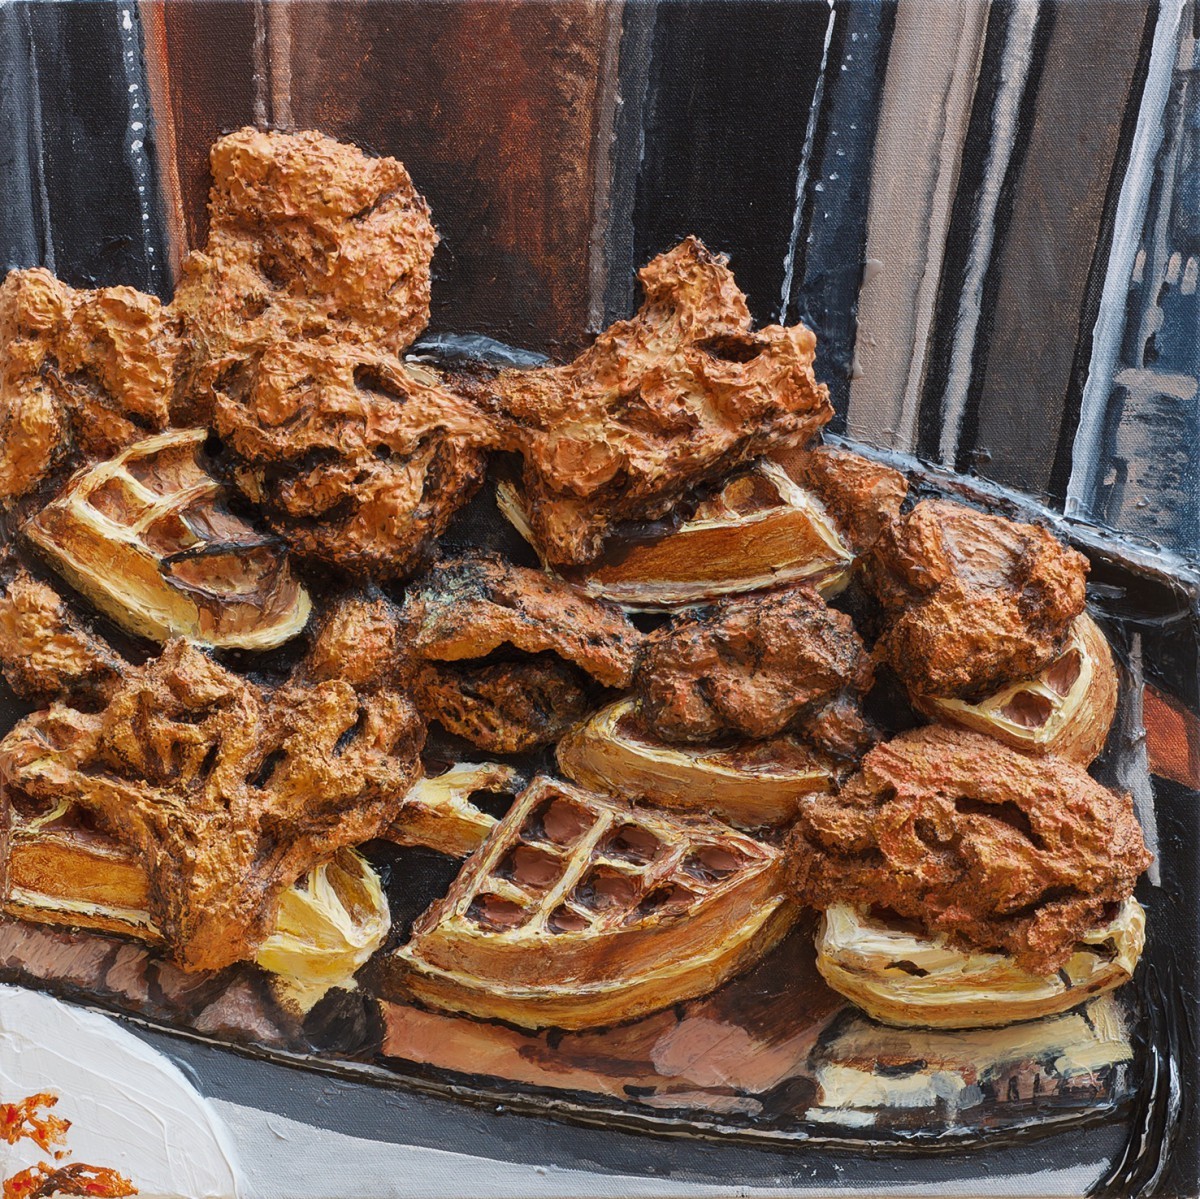 “FOOD PORN! (CHICKEN AND WAFFLES)”, 2012